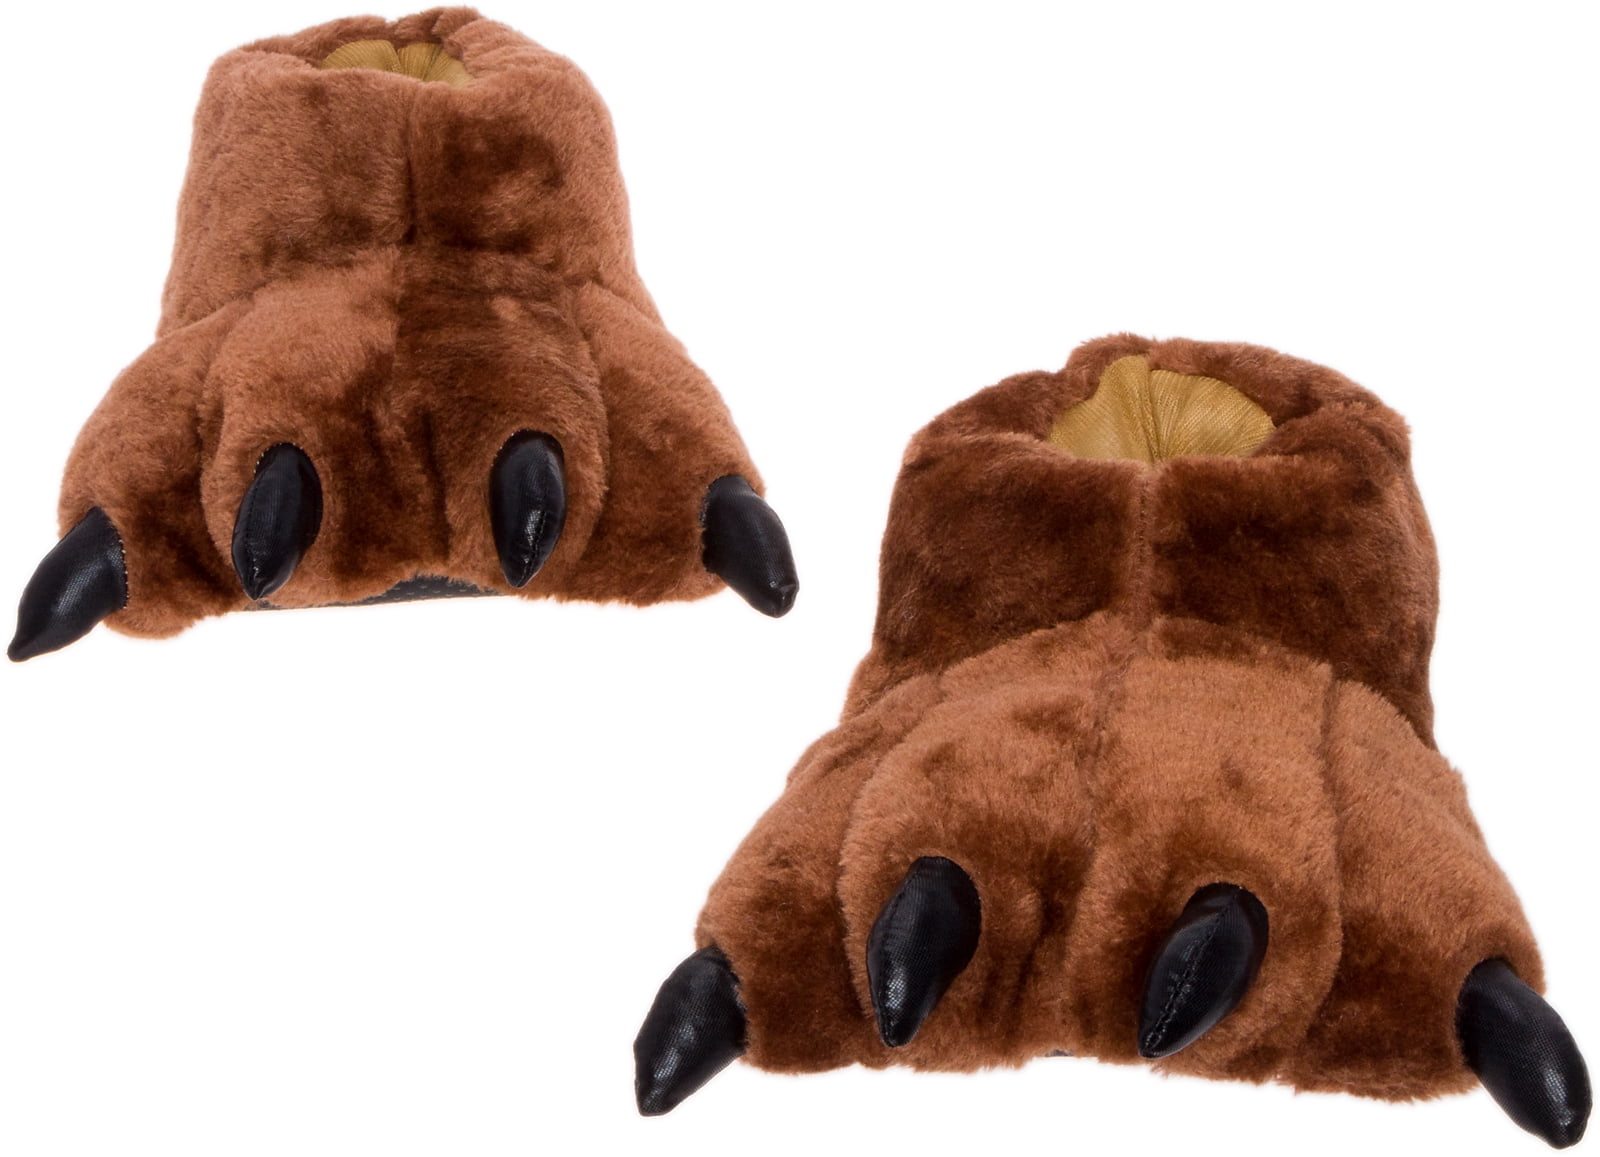 Lilly Bear Paw Animal Slippers - Novelty House Shoe (Dark Brown, Small) - Walmart.com